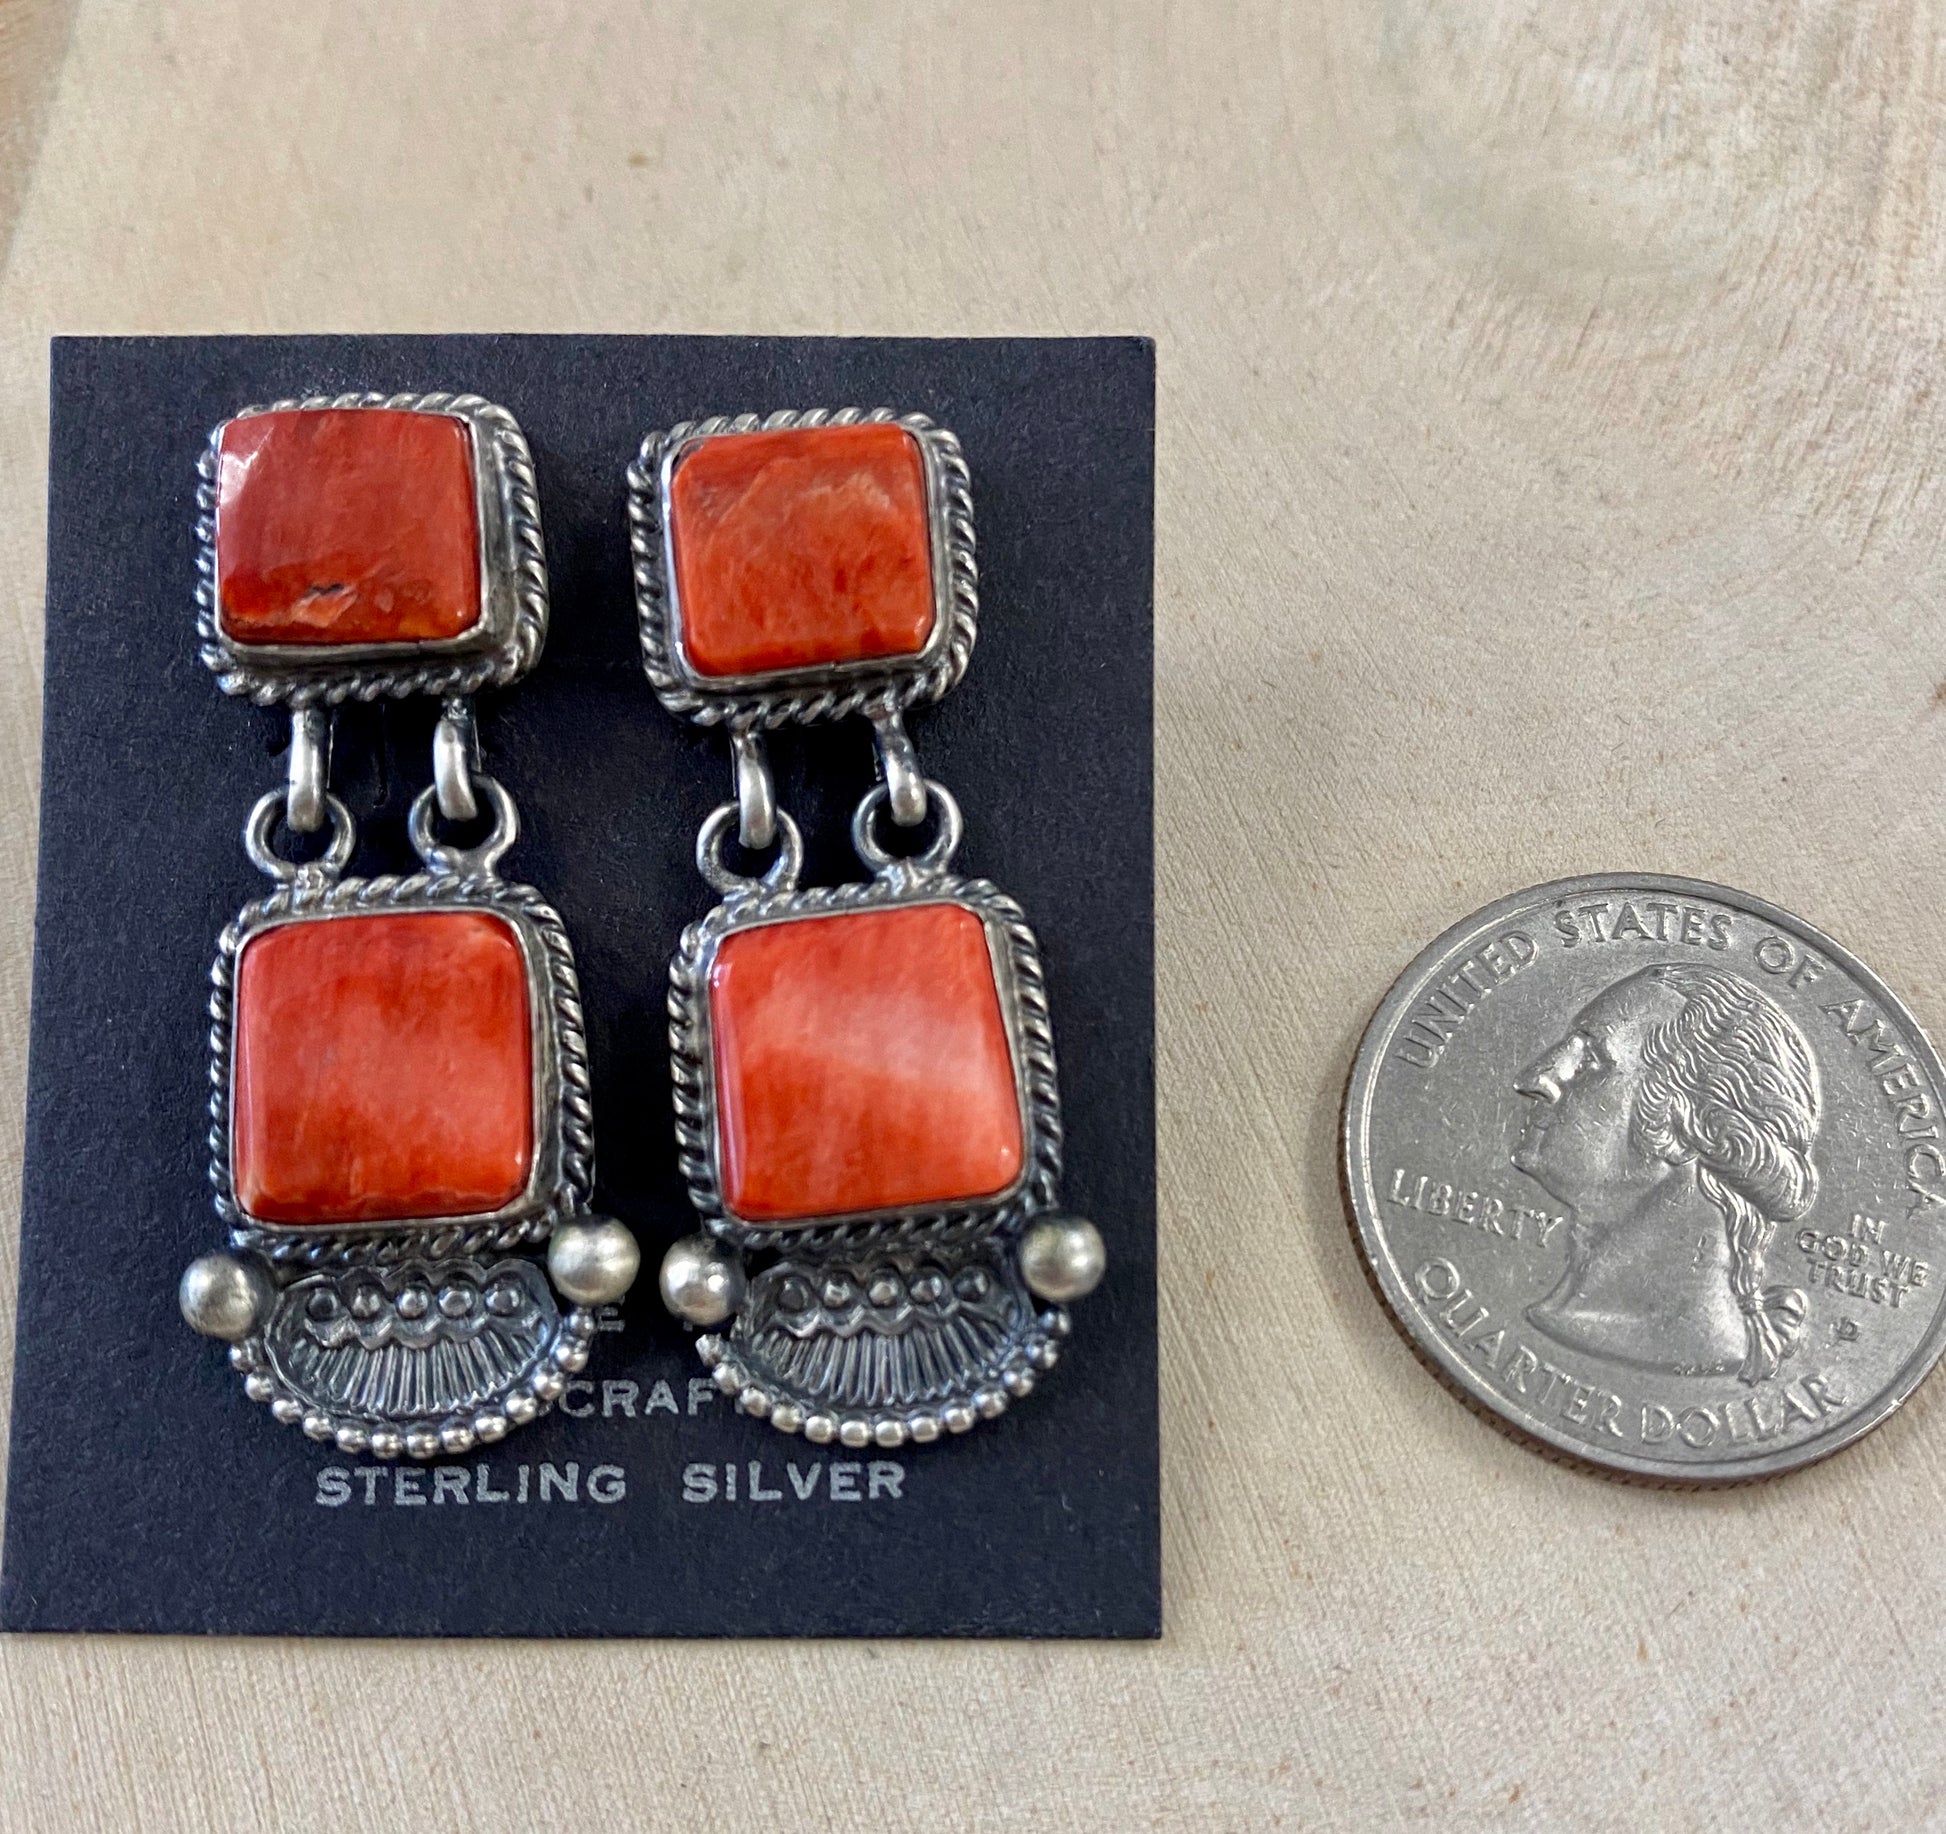 The O.A. Spiny Oyster Earrings - Ny Texas Style Boutique Red orange Spiny Oyster post sterling silver earrings. Stamped sterling and signed by Native American artist silversmith Oscar Alexius on the back. The perfect pop of color for any outfit!   Size: 1.25” Inches Length   Stone: Spiny Oyster  Singed: YES "O.A."   Hallmark/Artist: Oscar Alexius 